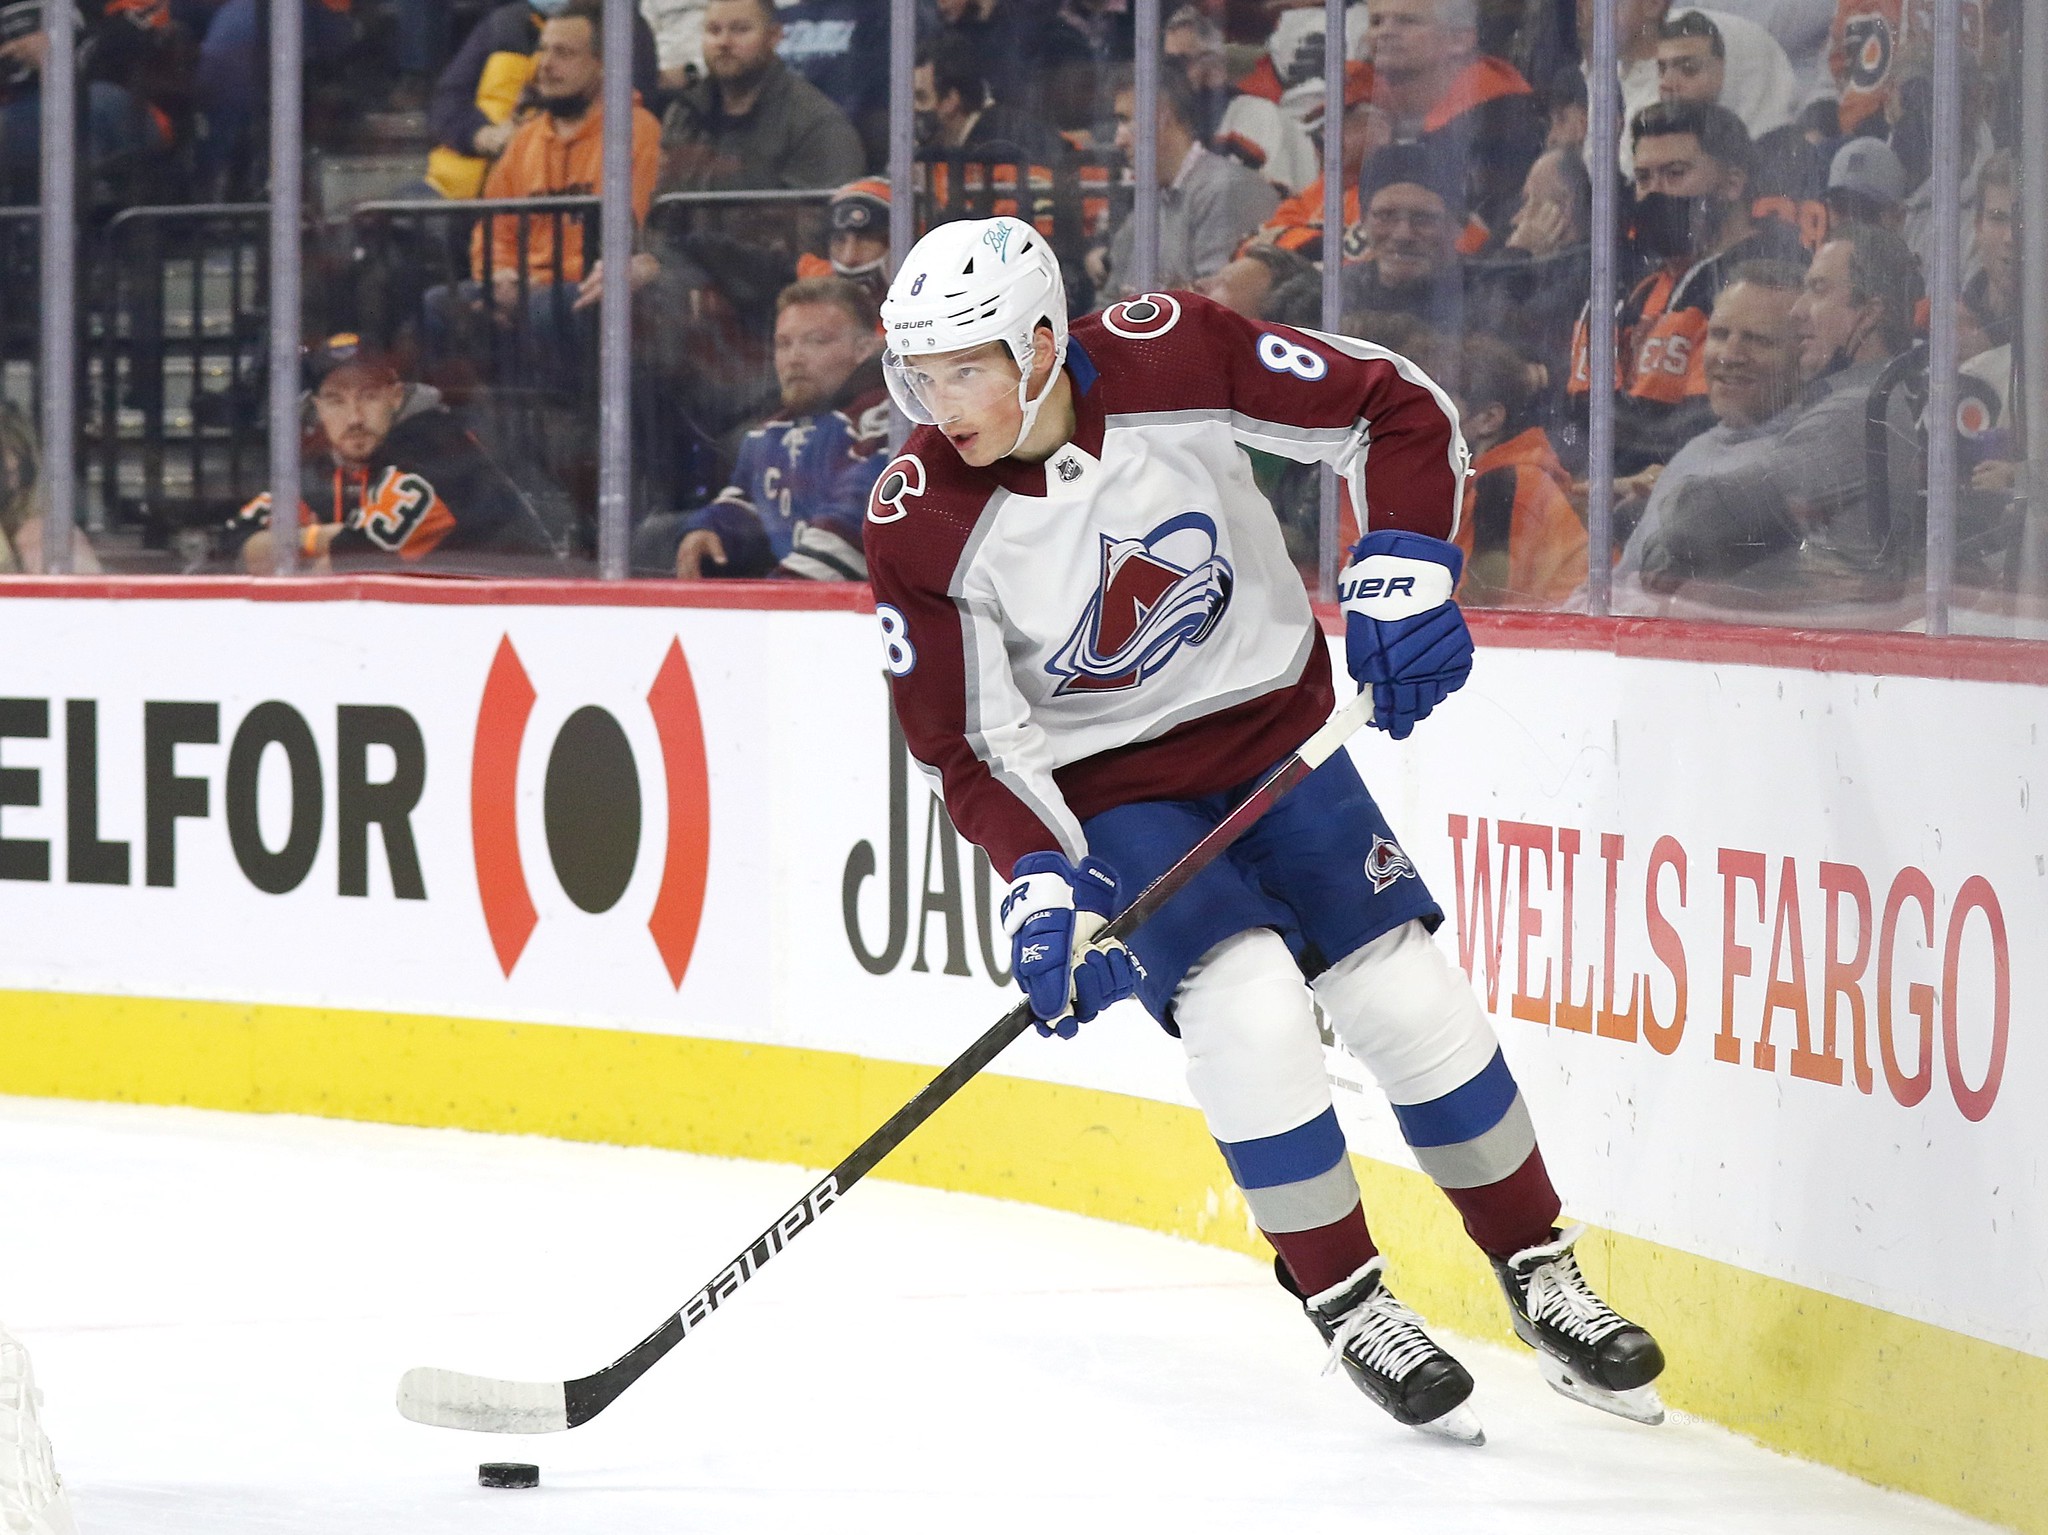 Oilers hold off Coyotes 5-4; McDavid reaches 140 points